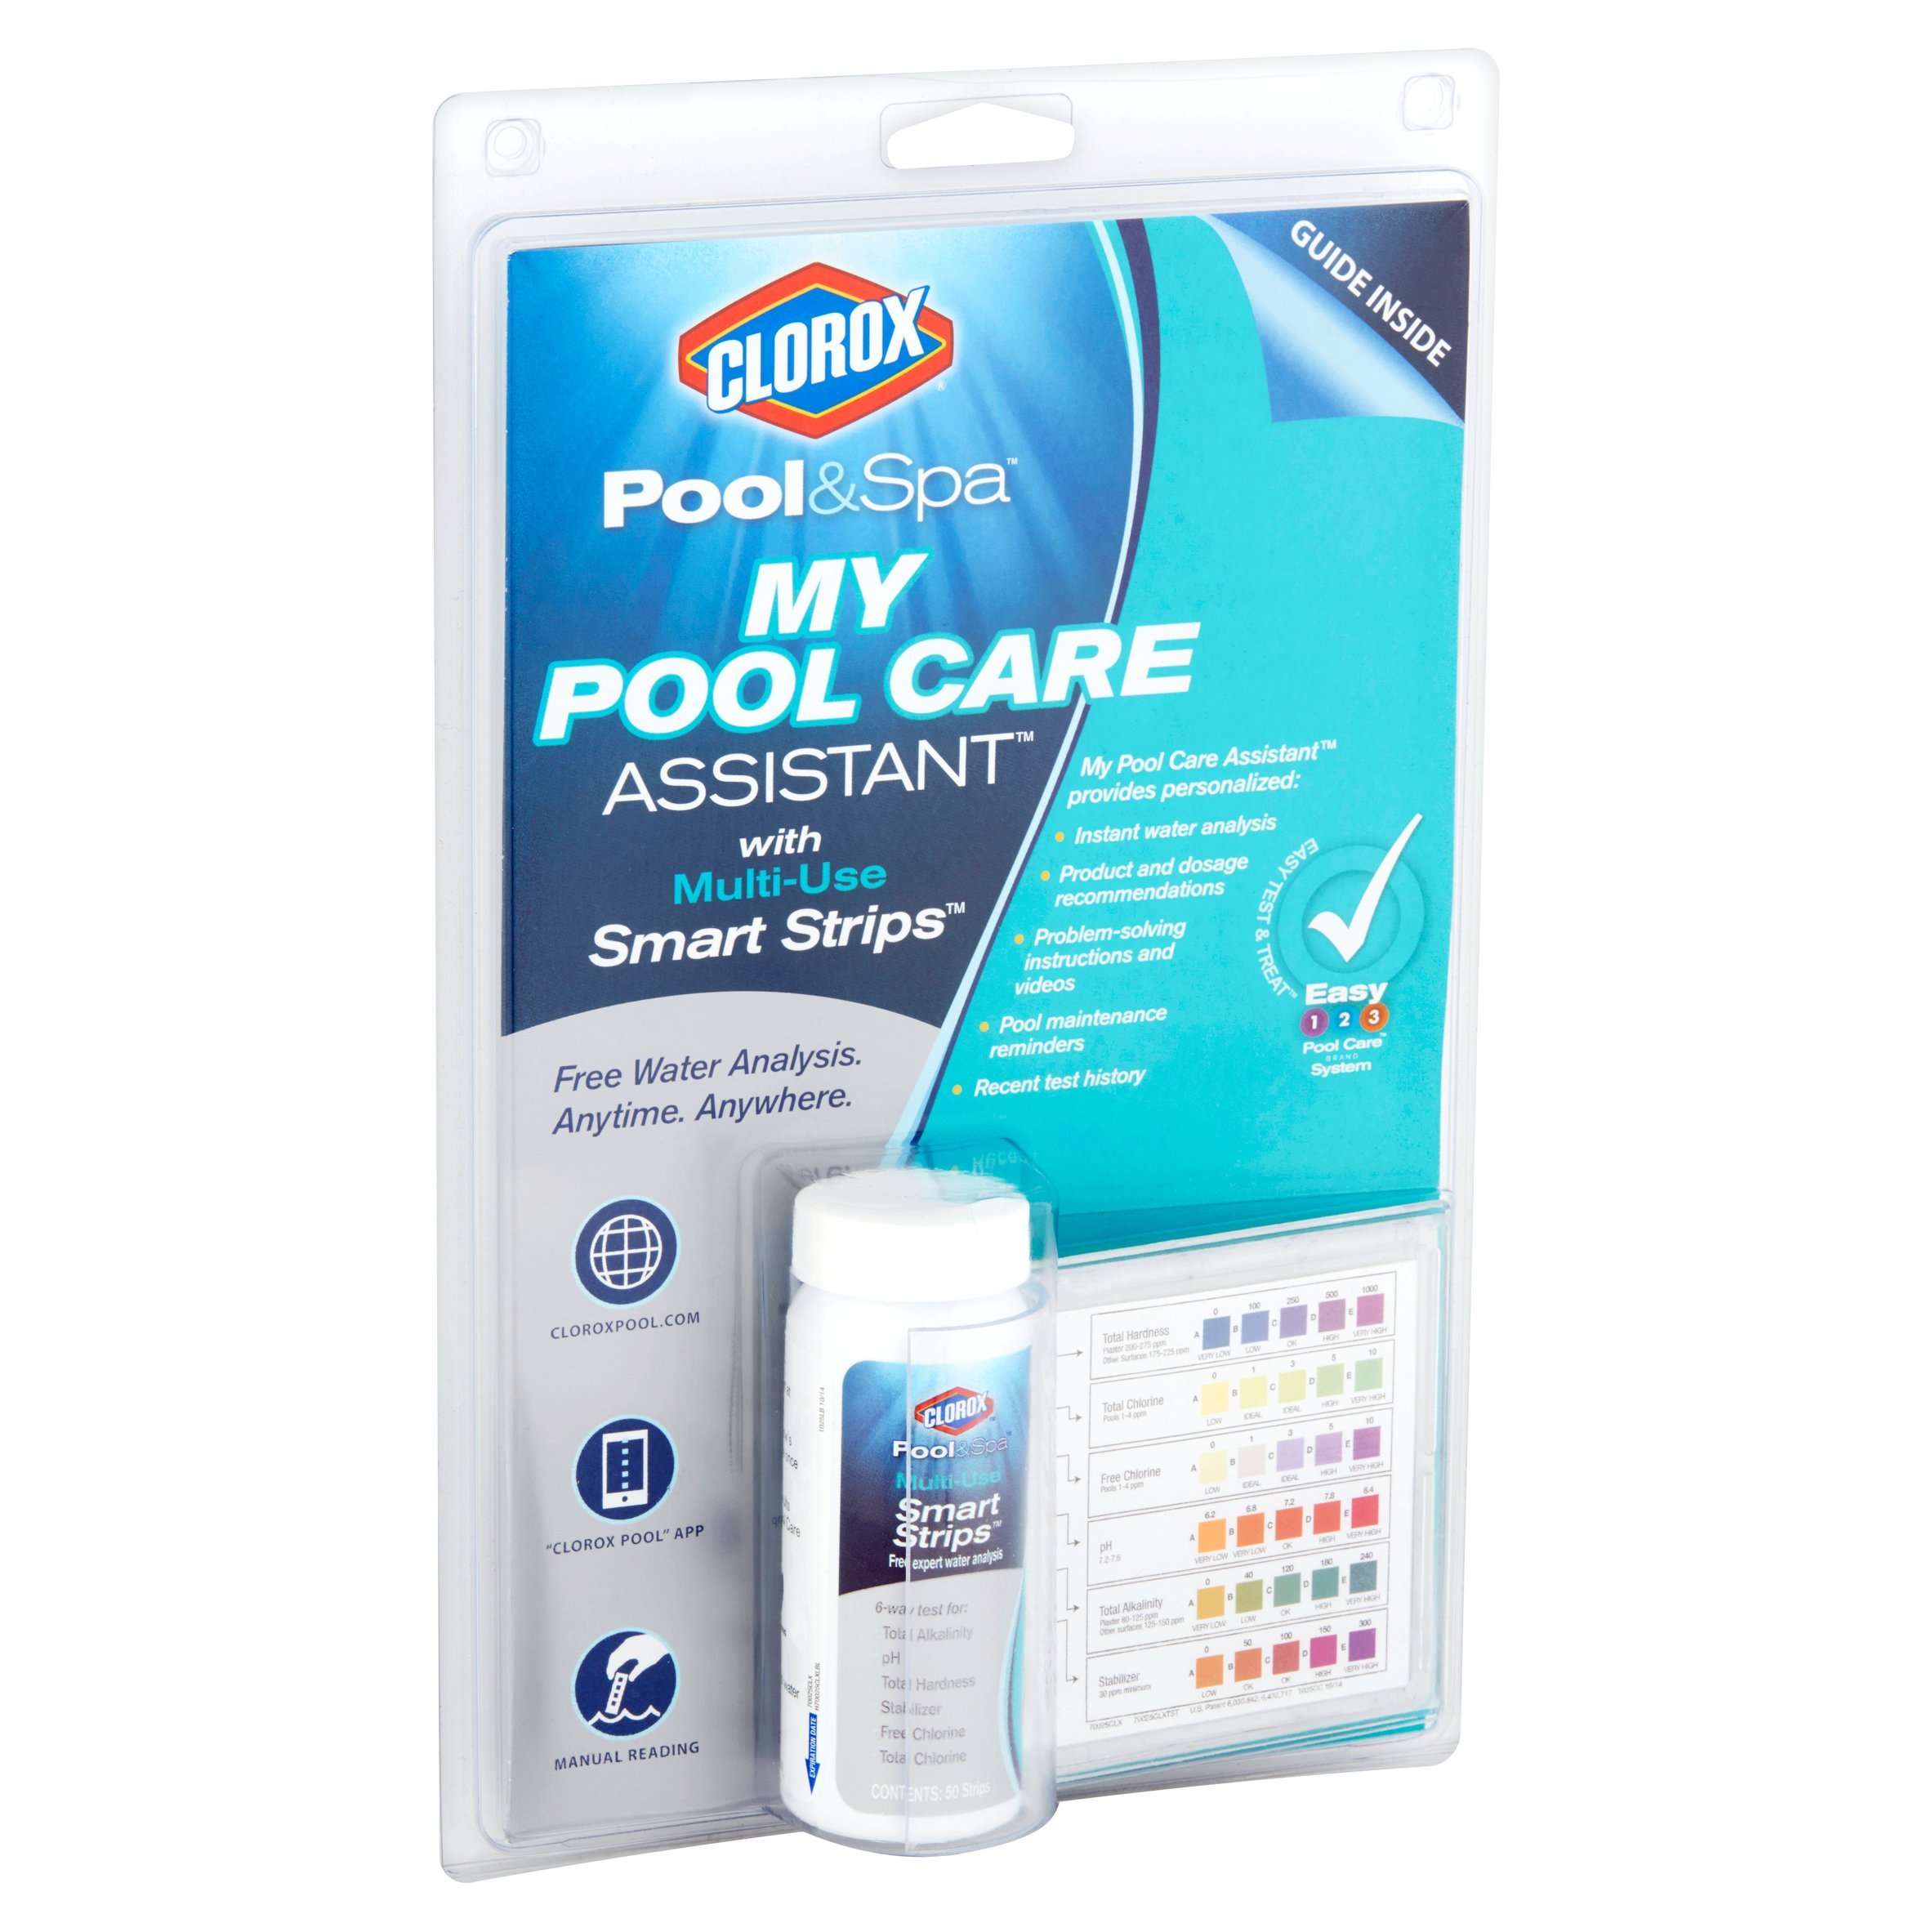 25 Smart Strips Clorox My Pool Care Assistant Test Strips